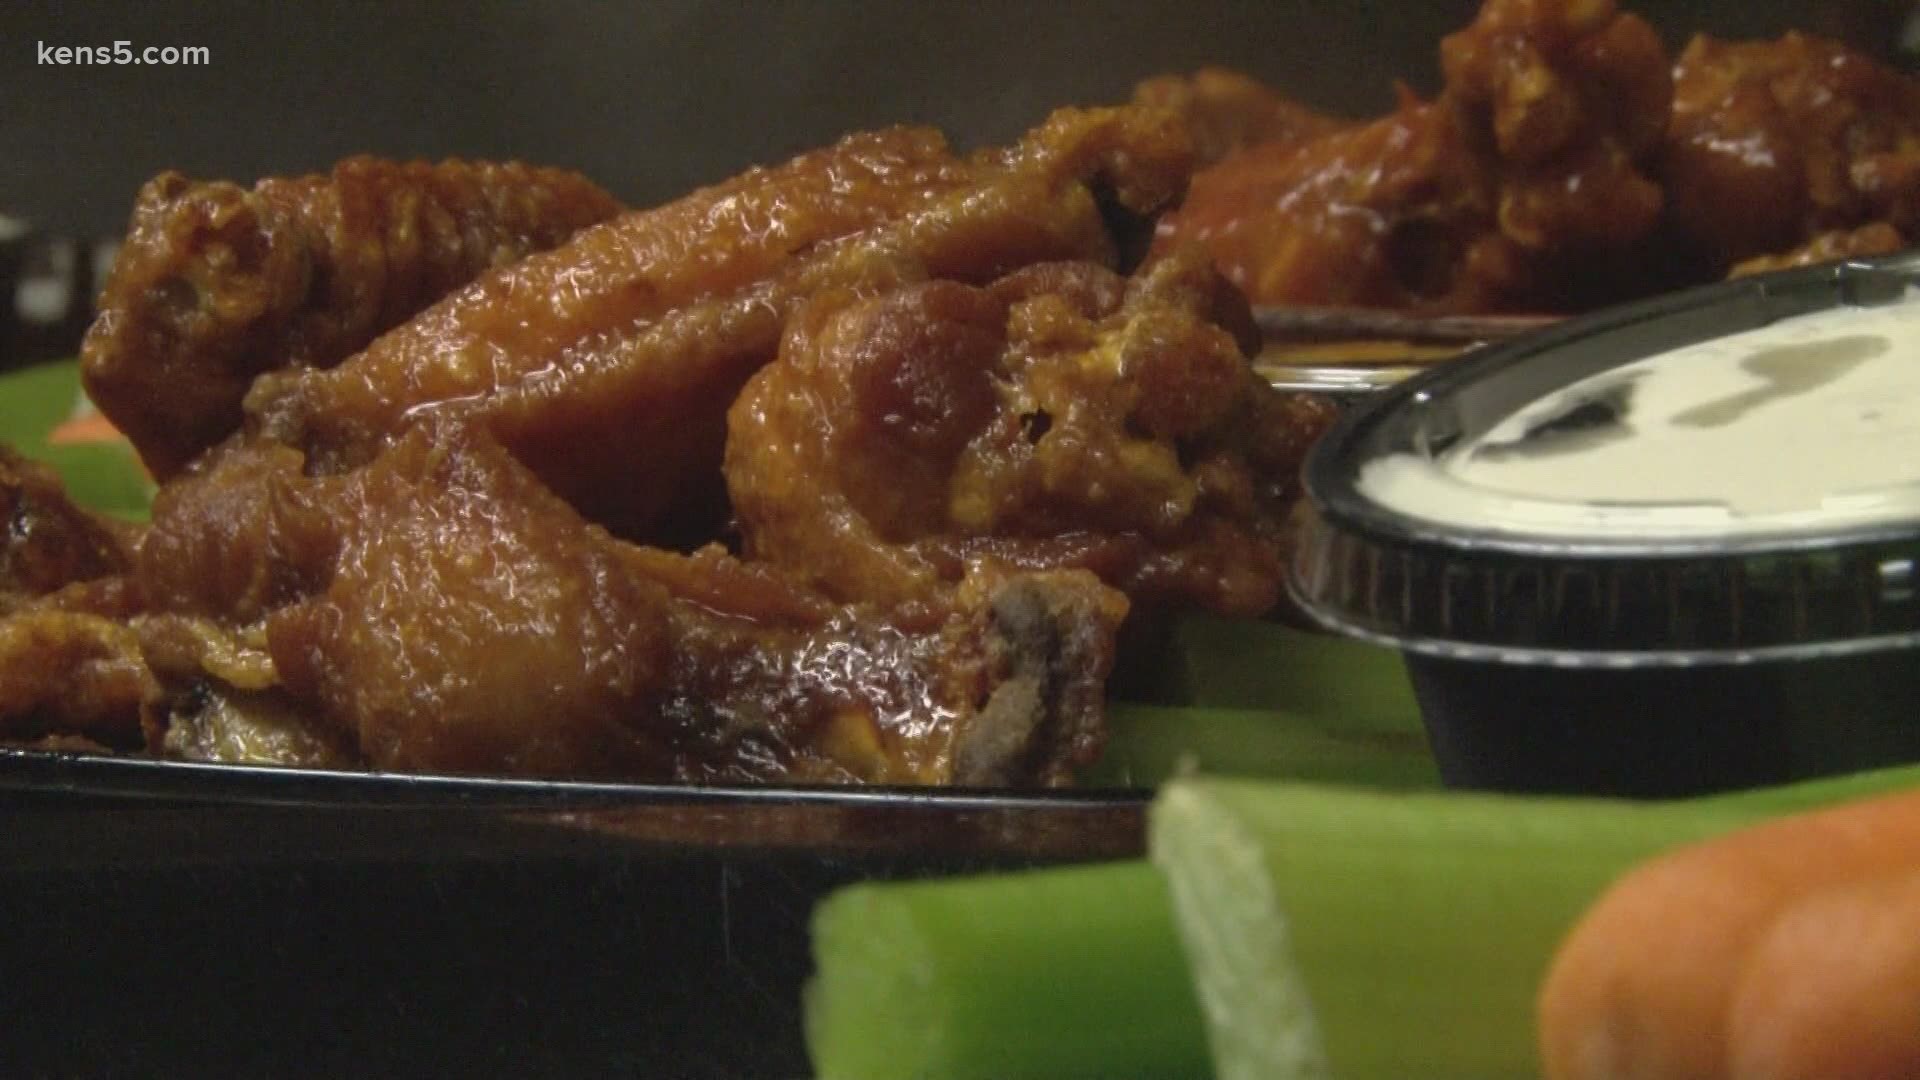 The National Chicken Council estimates hungry fans will eat 1.4 BILLION wings this weekend.